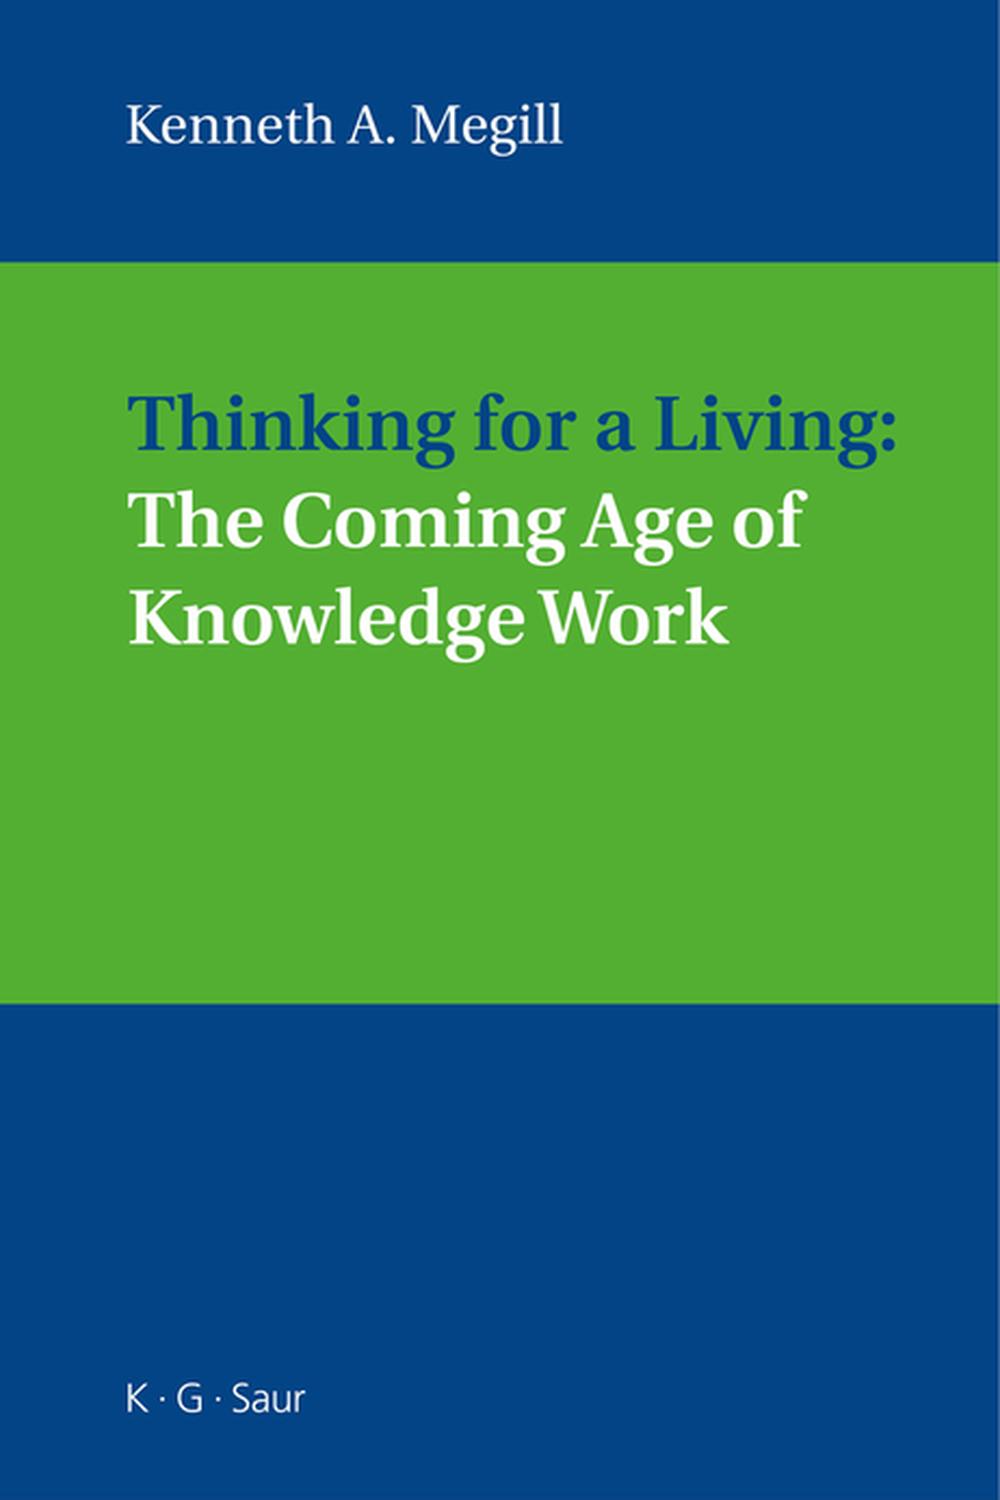 Thinking for a Living: The Coming Age of Knowledge Work - Kenneth A. Megill